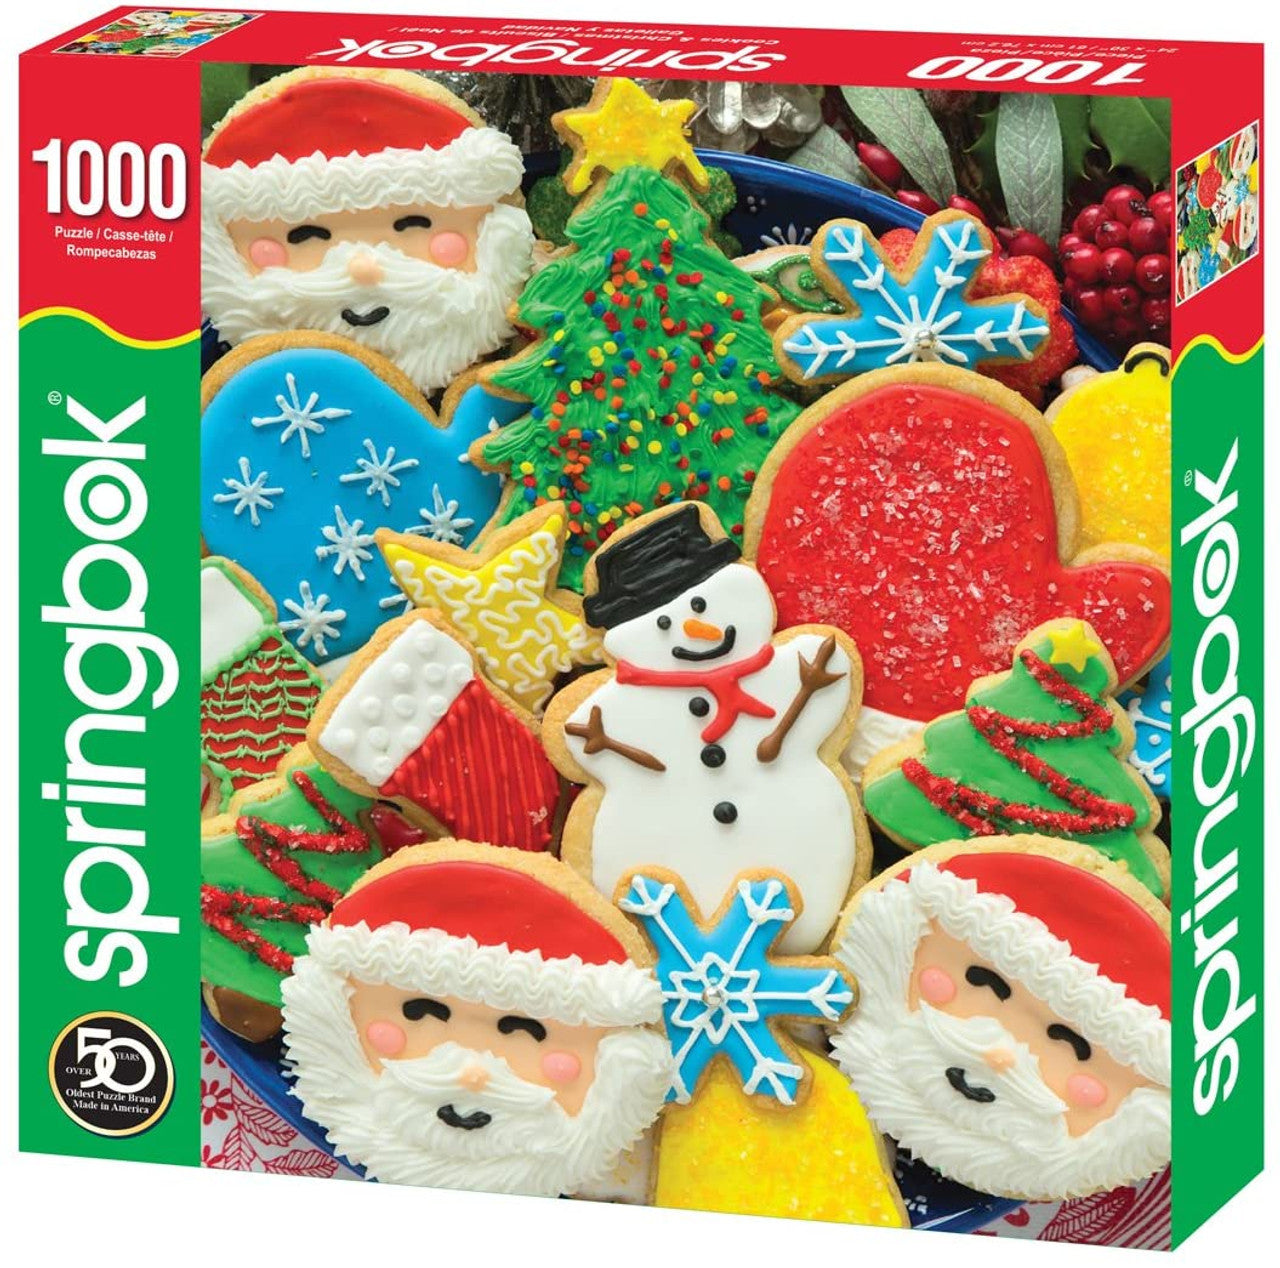 Cookies & Christmas 500pc Puzzle